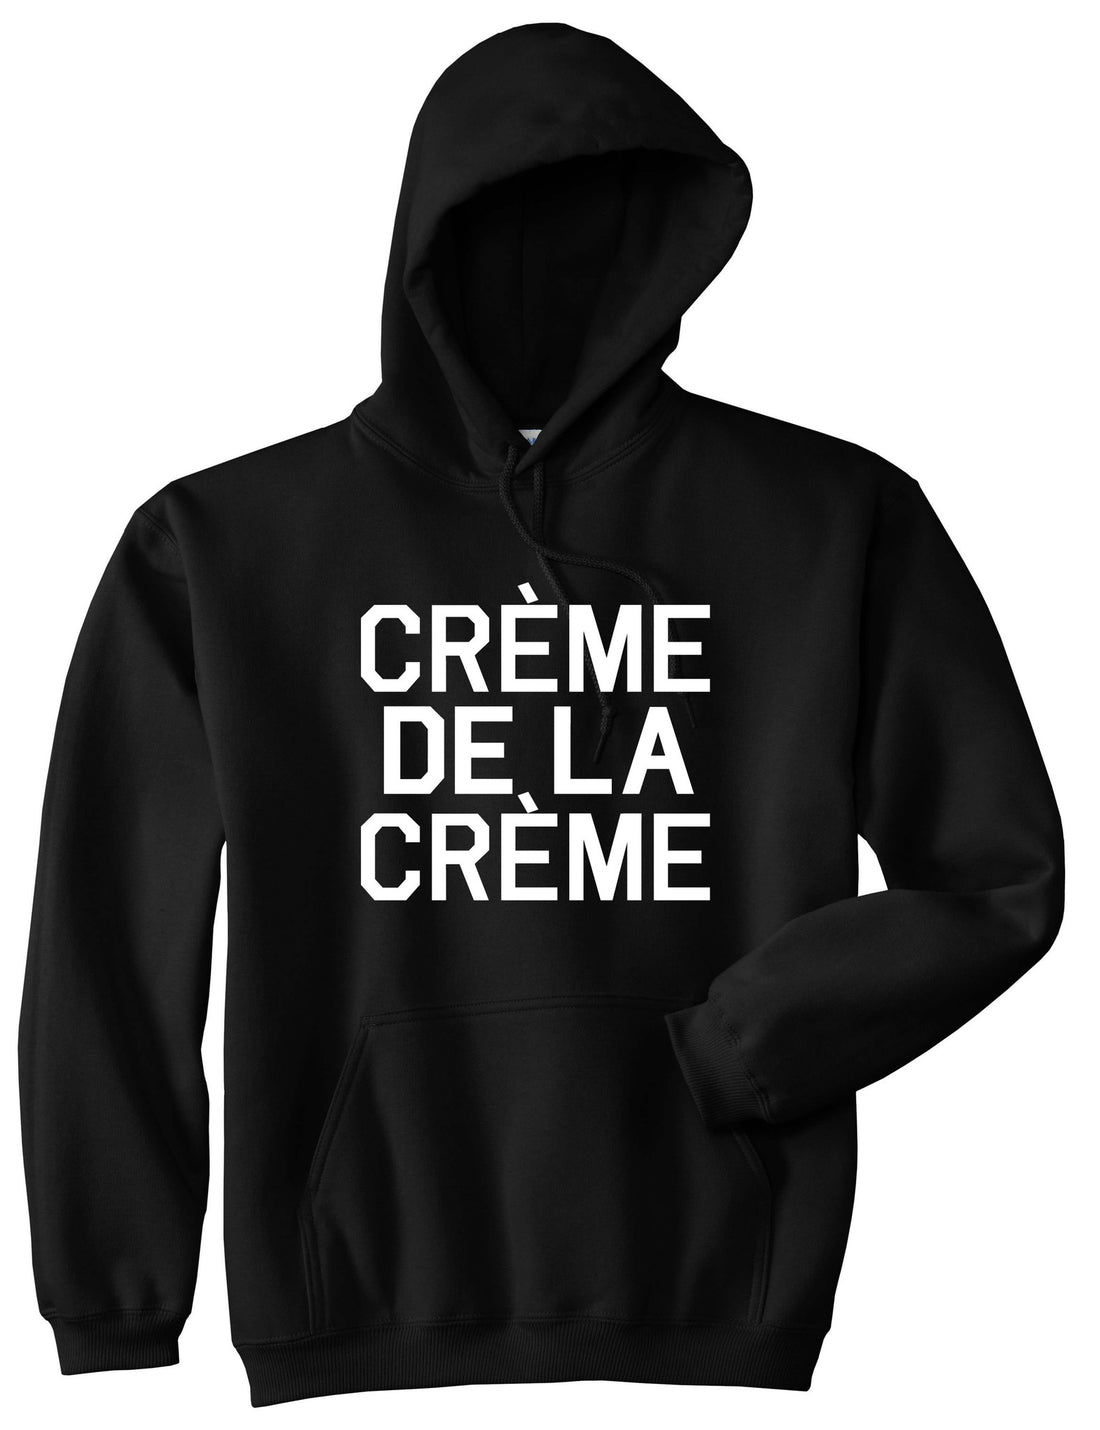 Creme De La Creme Celebrity Fashion Crop Pullover Hoodie Hoody In Black by Kings Of NY